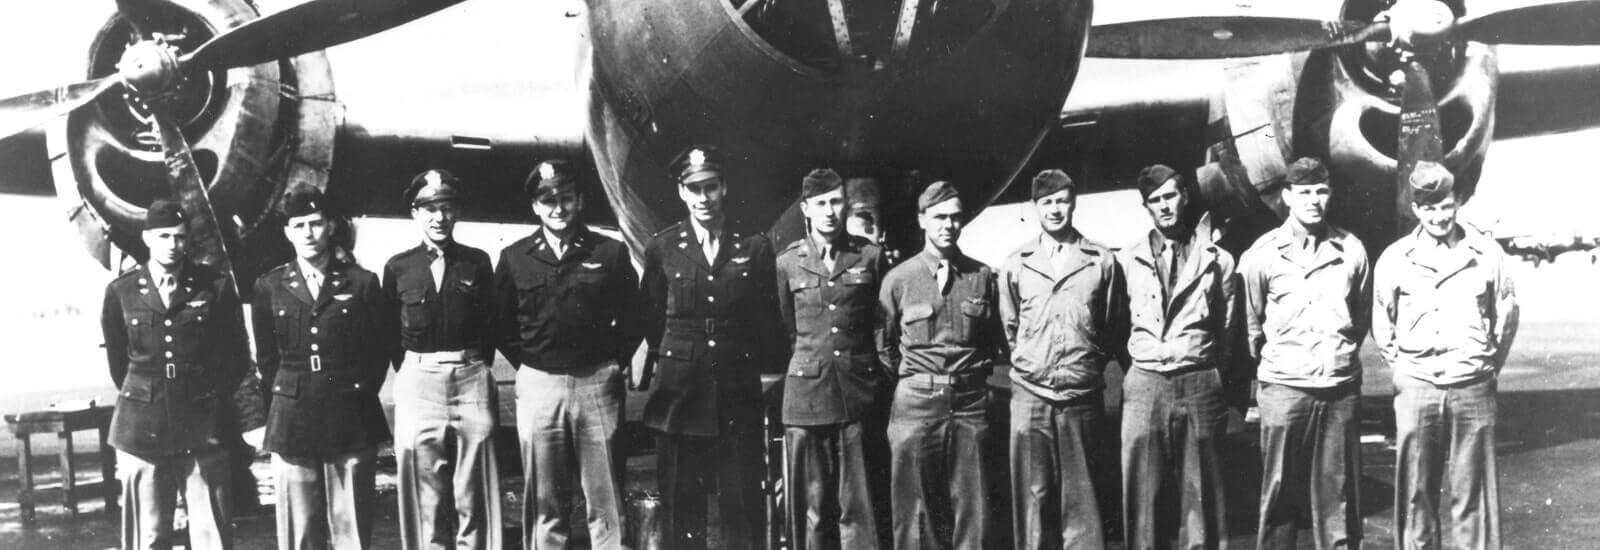 Old grayscale photo of WW2 soldiers standing in front of a bomber plane